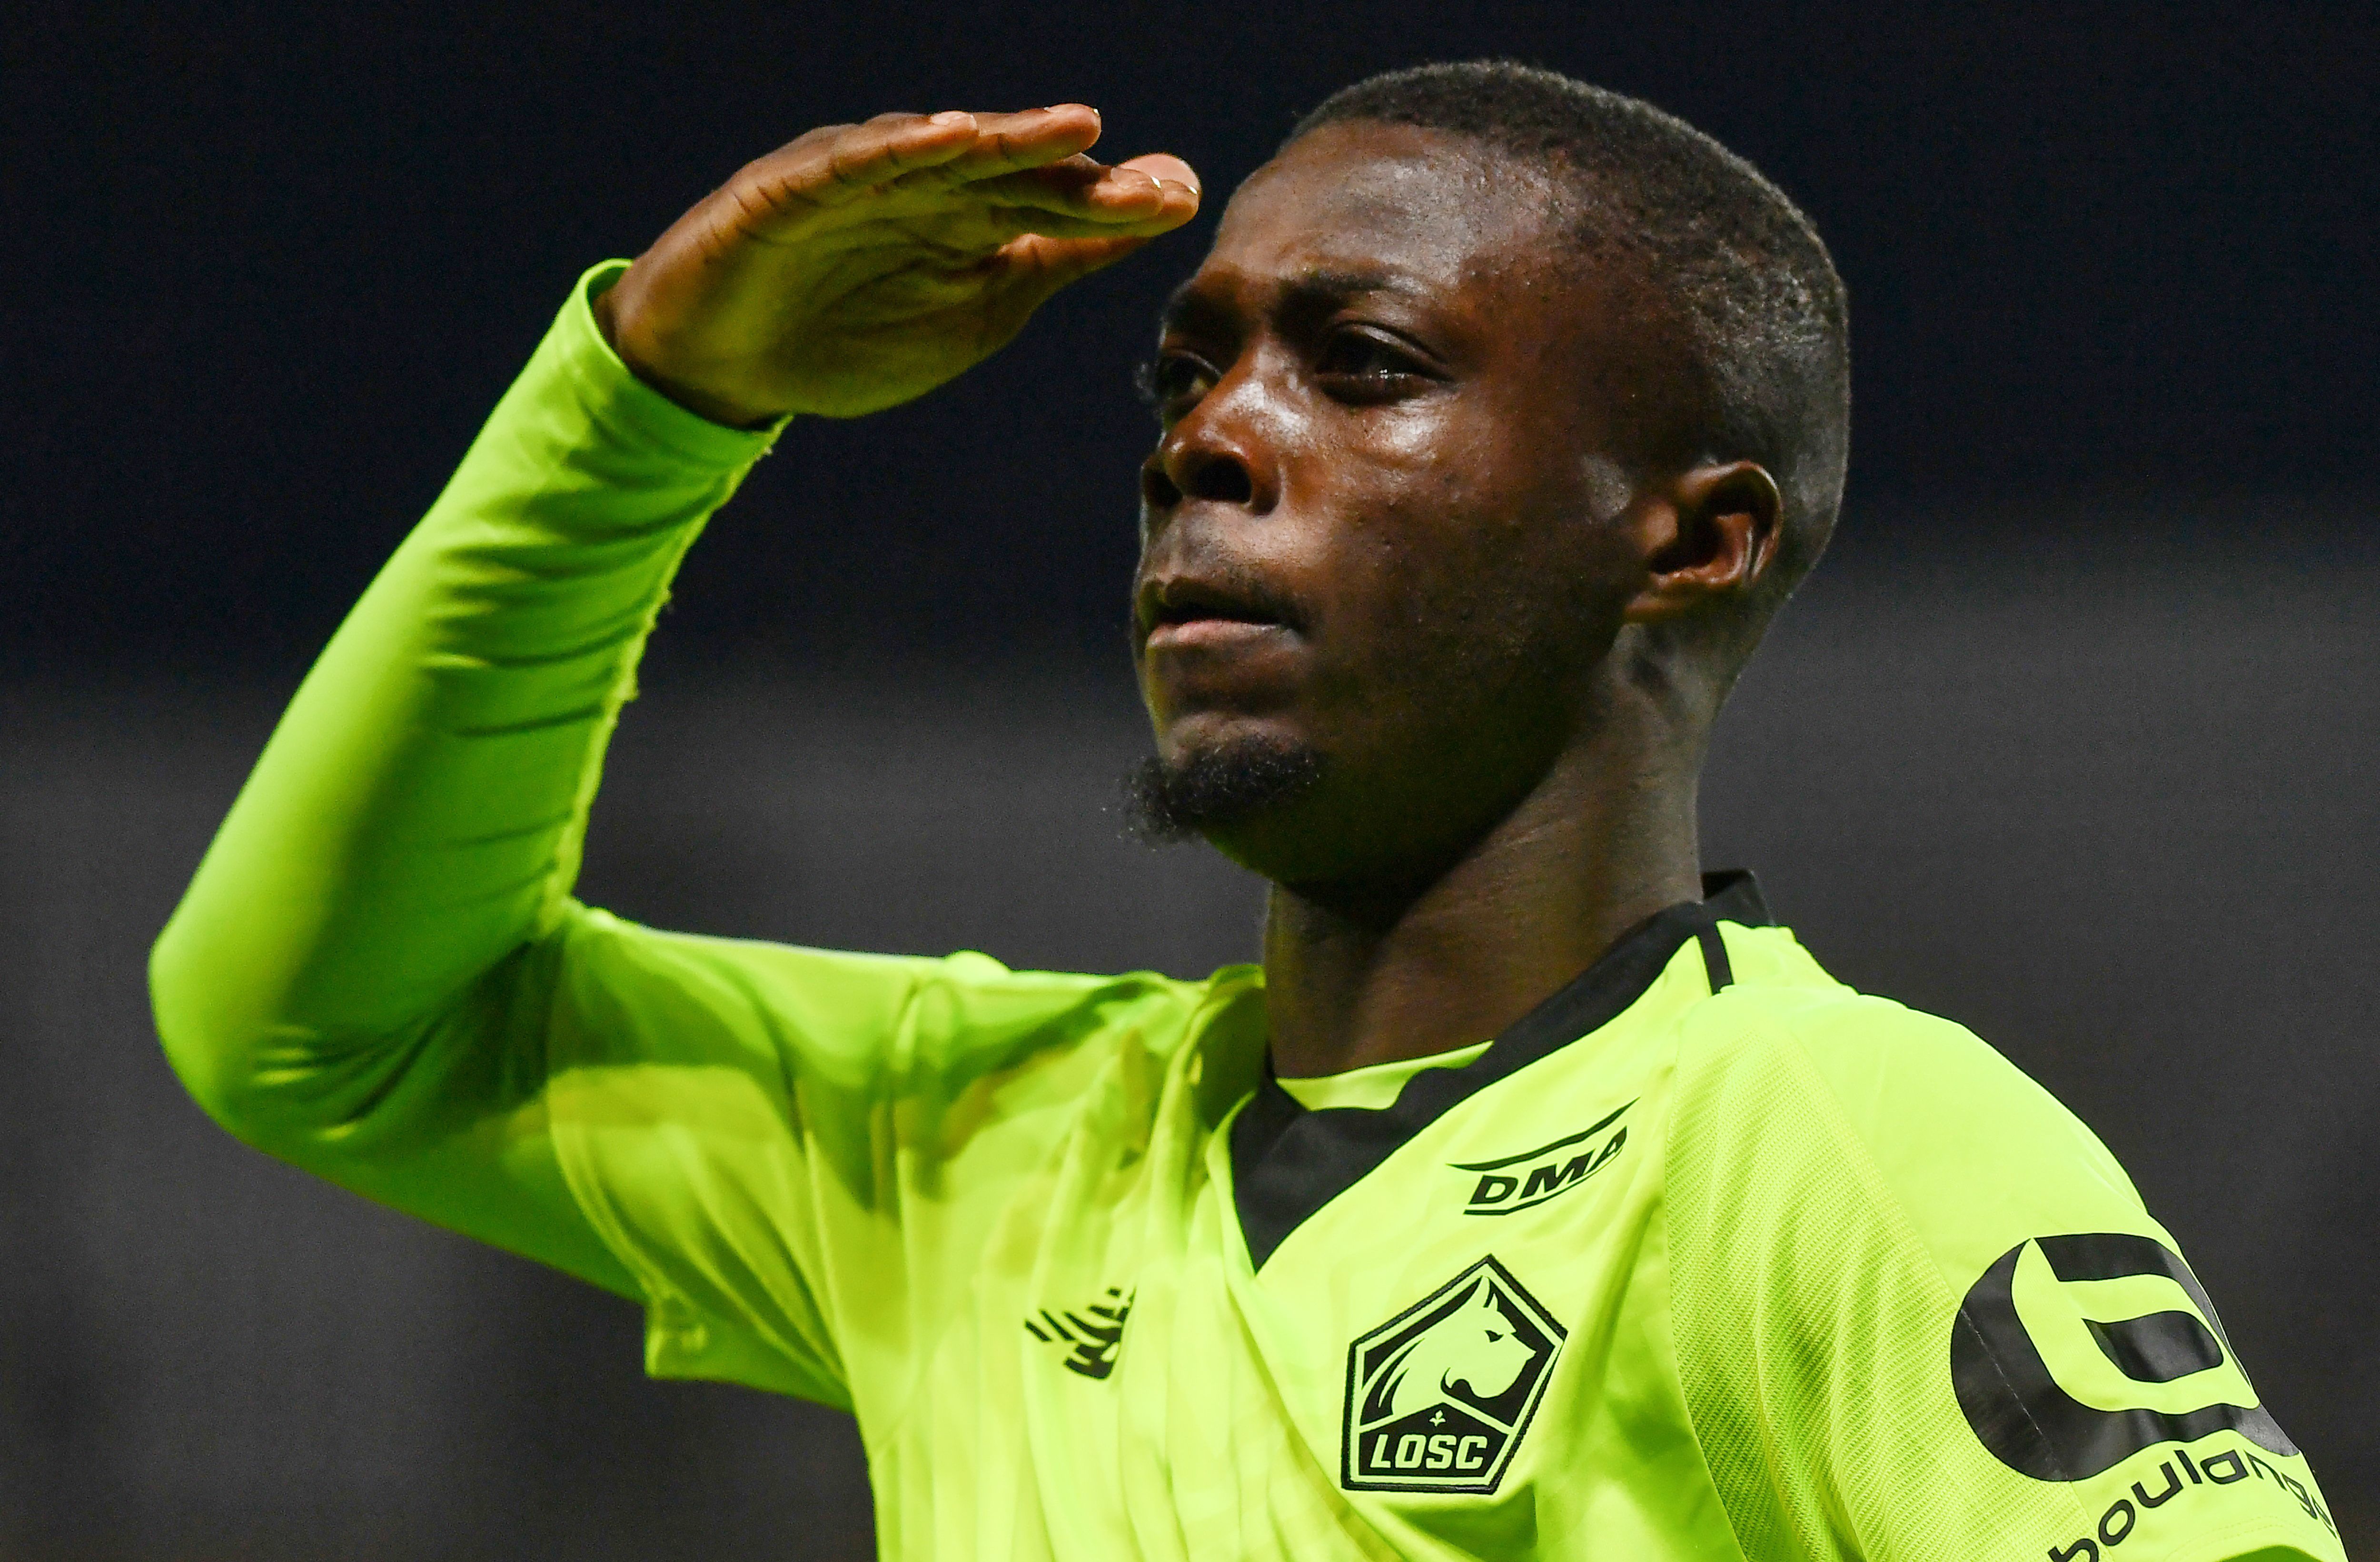 Lille's Ivorian forward Nicolas Pepe celebrates after scoring a goal during the French L1 football match between Montpellier and Lille on December 4, 2018 at the the Mosson stadium in Montpellier, southern France. (Photo by PASCAL GUYOT / AFP)        (Photo credit should read PASCAL GUYOT/AFP/Getty Images)